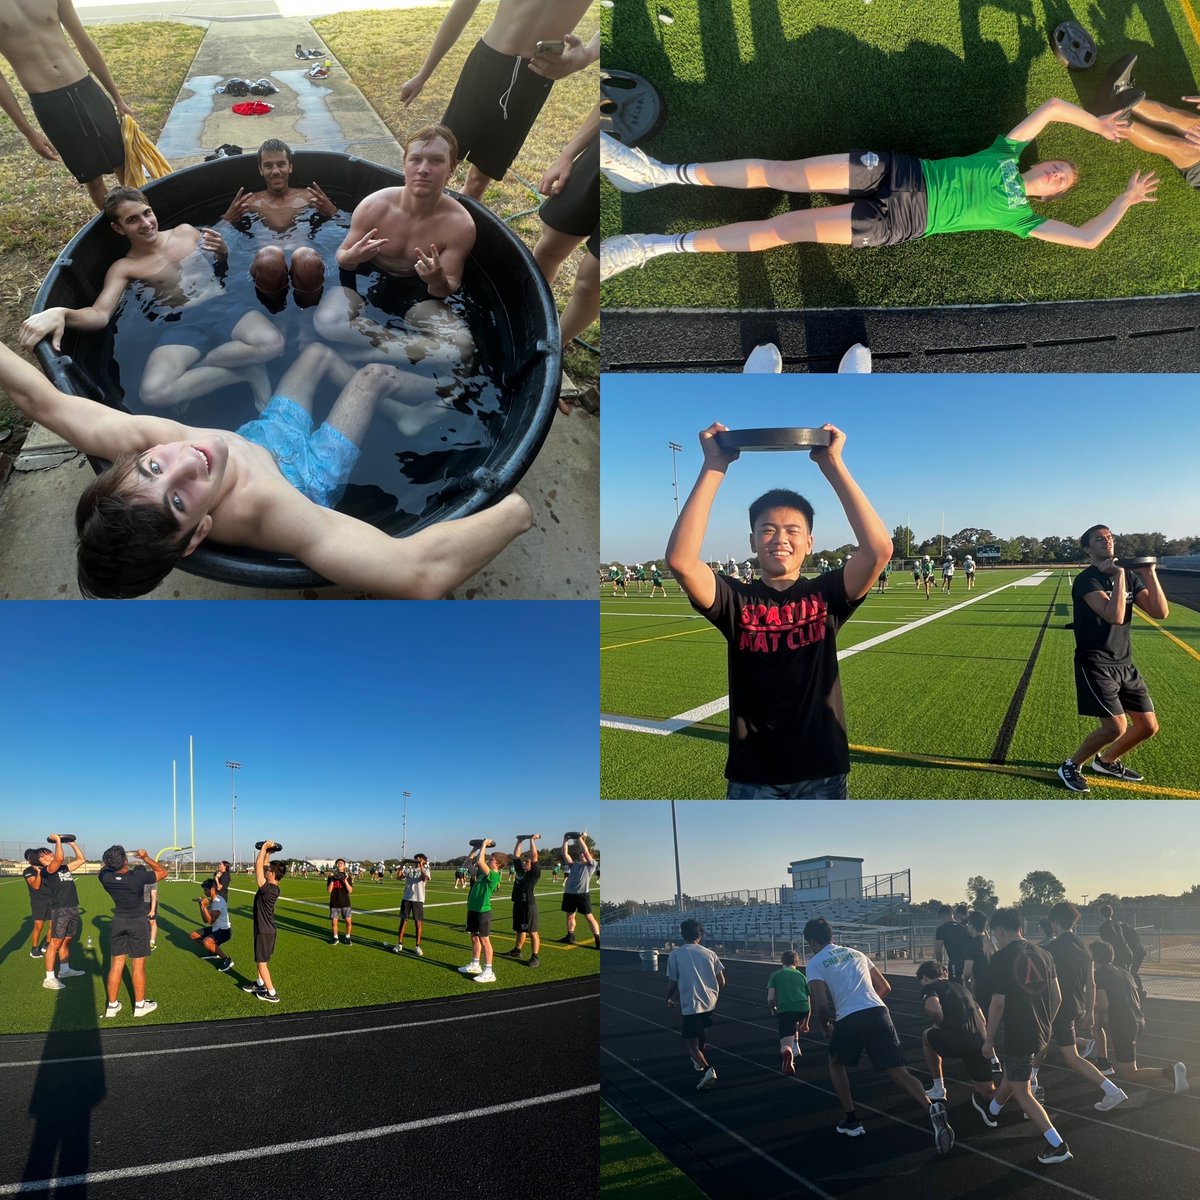 Making gains during Boot Camp Week 2! We are ready to take on the @USMC CFT with the Marines tomorrow! #RunToTheBattle #EDC #PTT @cabcslc @slcathletics @carrollisd